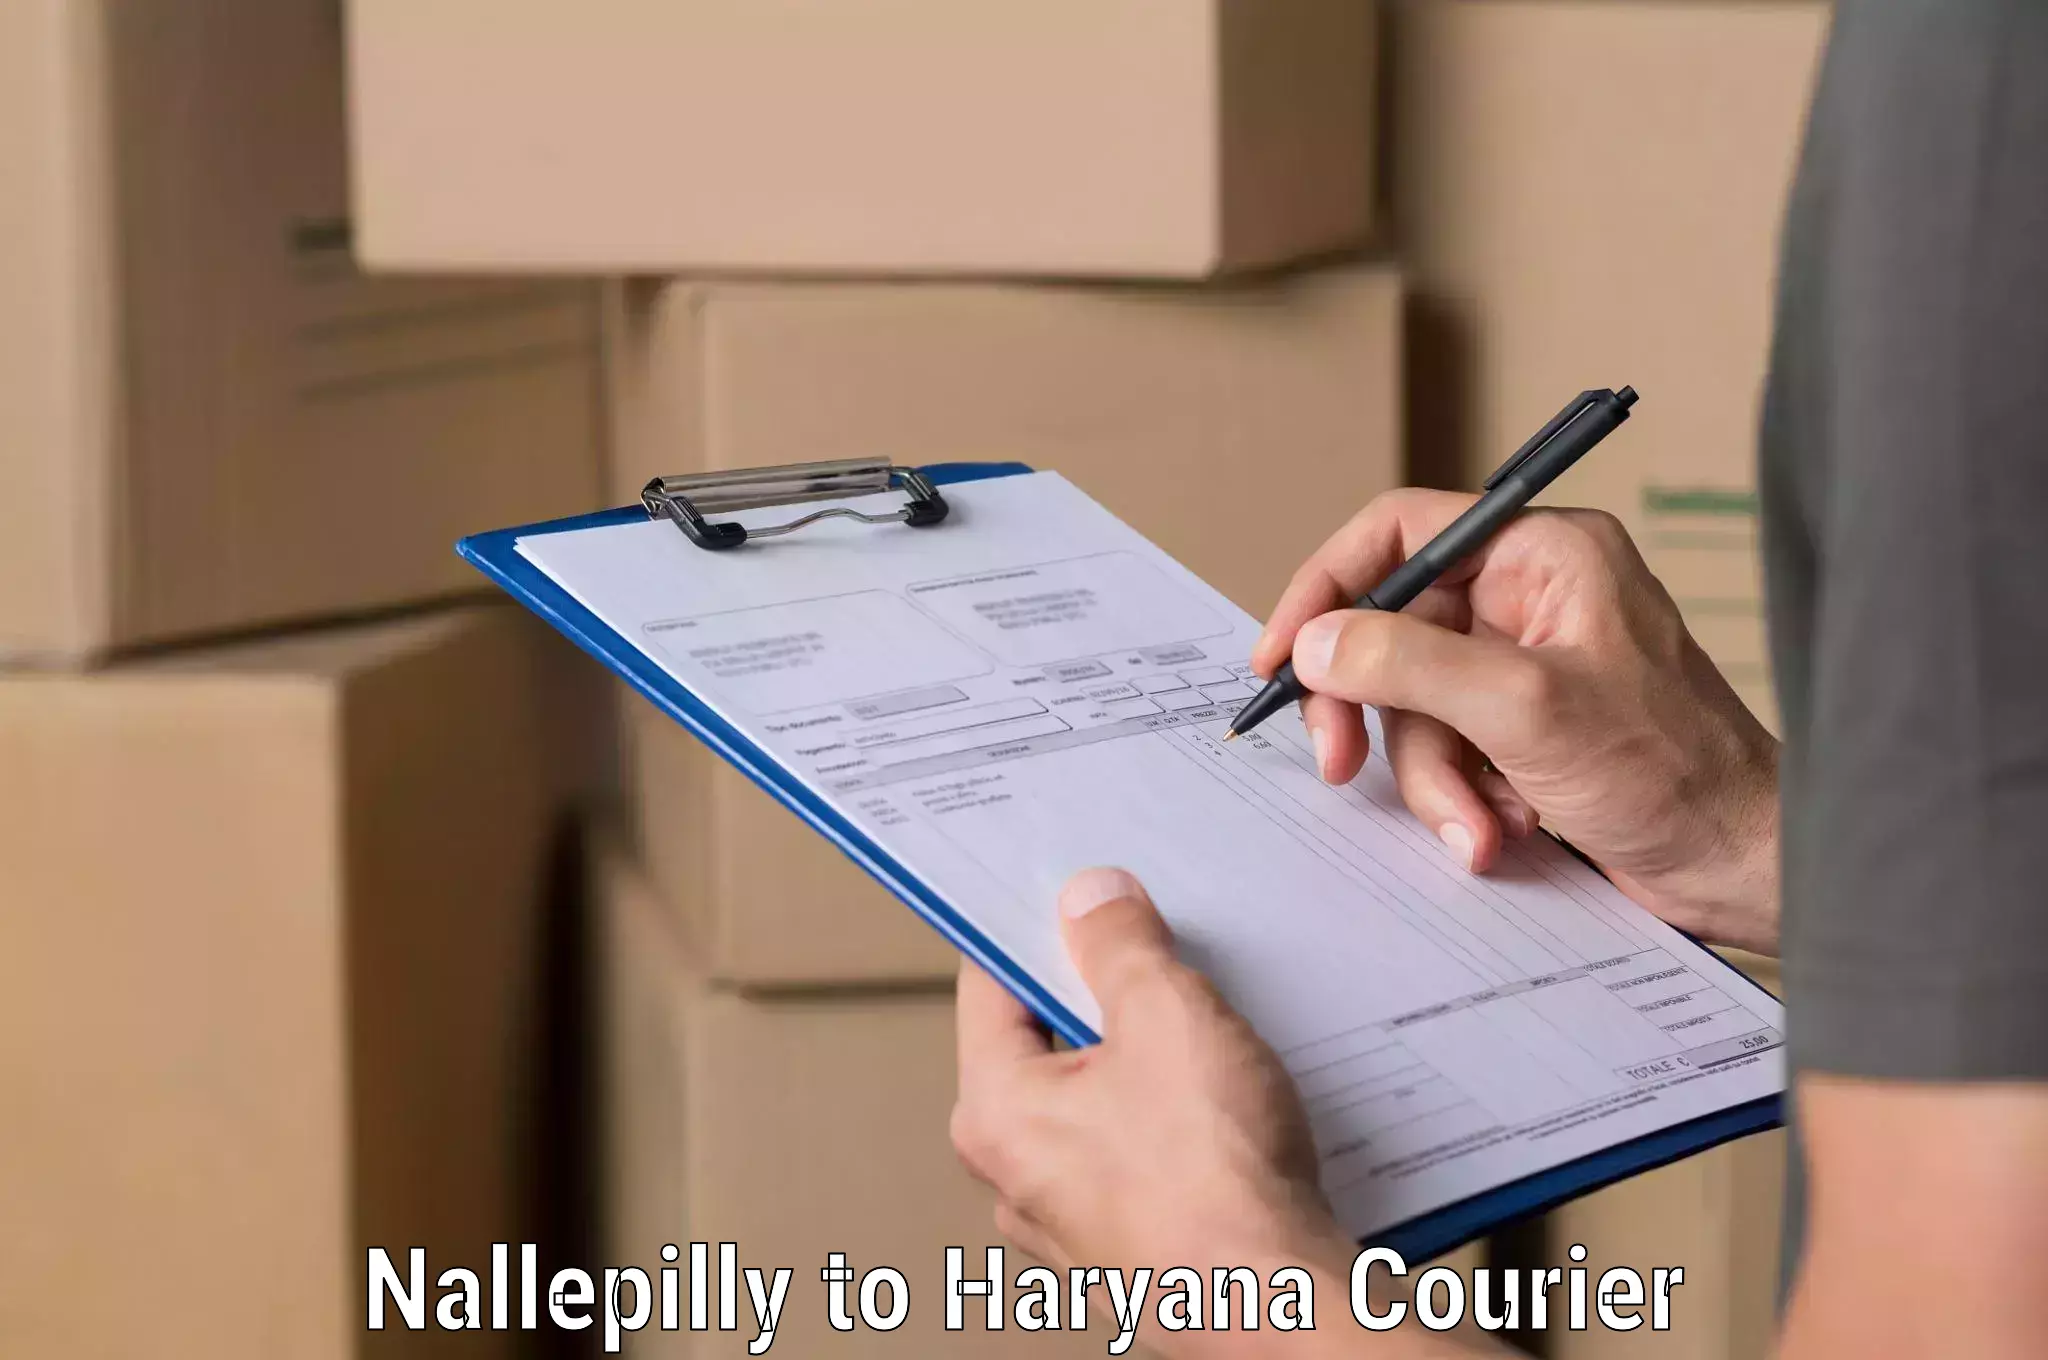 Reliable courier service in Nallepilly to Gurgaon